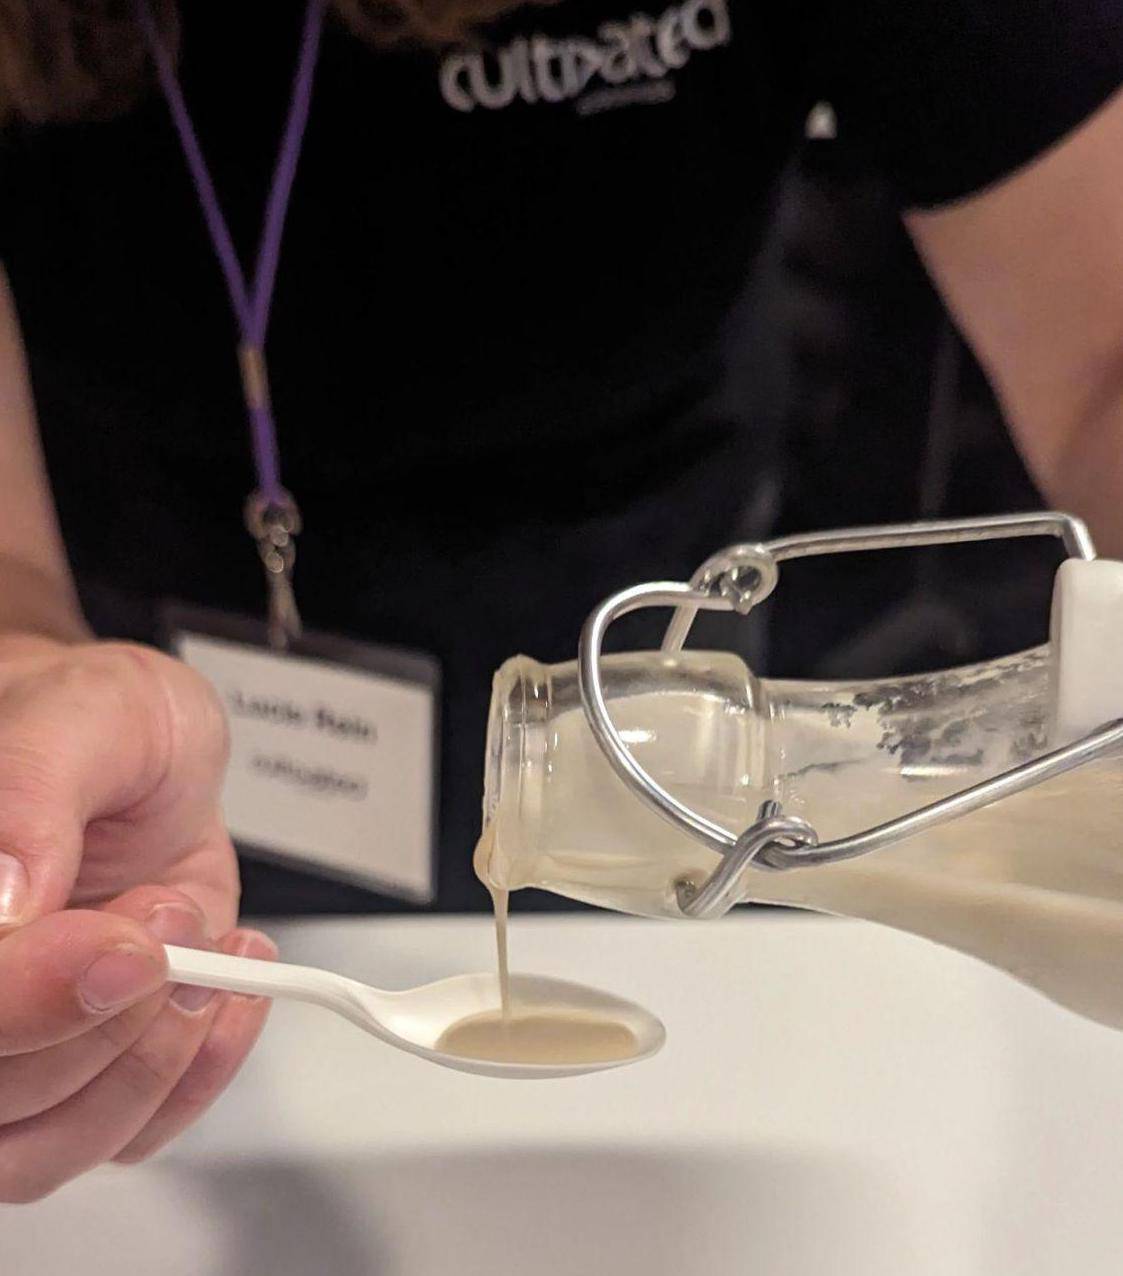 Cultivated Biosciences, a Swiss biotech startup creating fats from yeast fermentation, has presented its first proof-of-concept, a dairy-free coffee creamer.